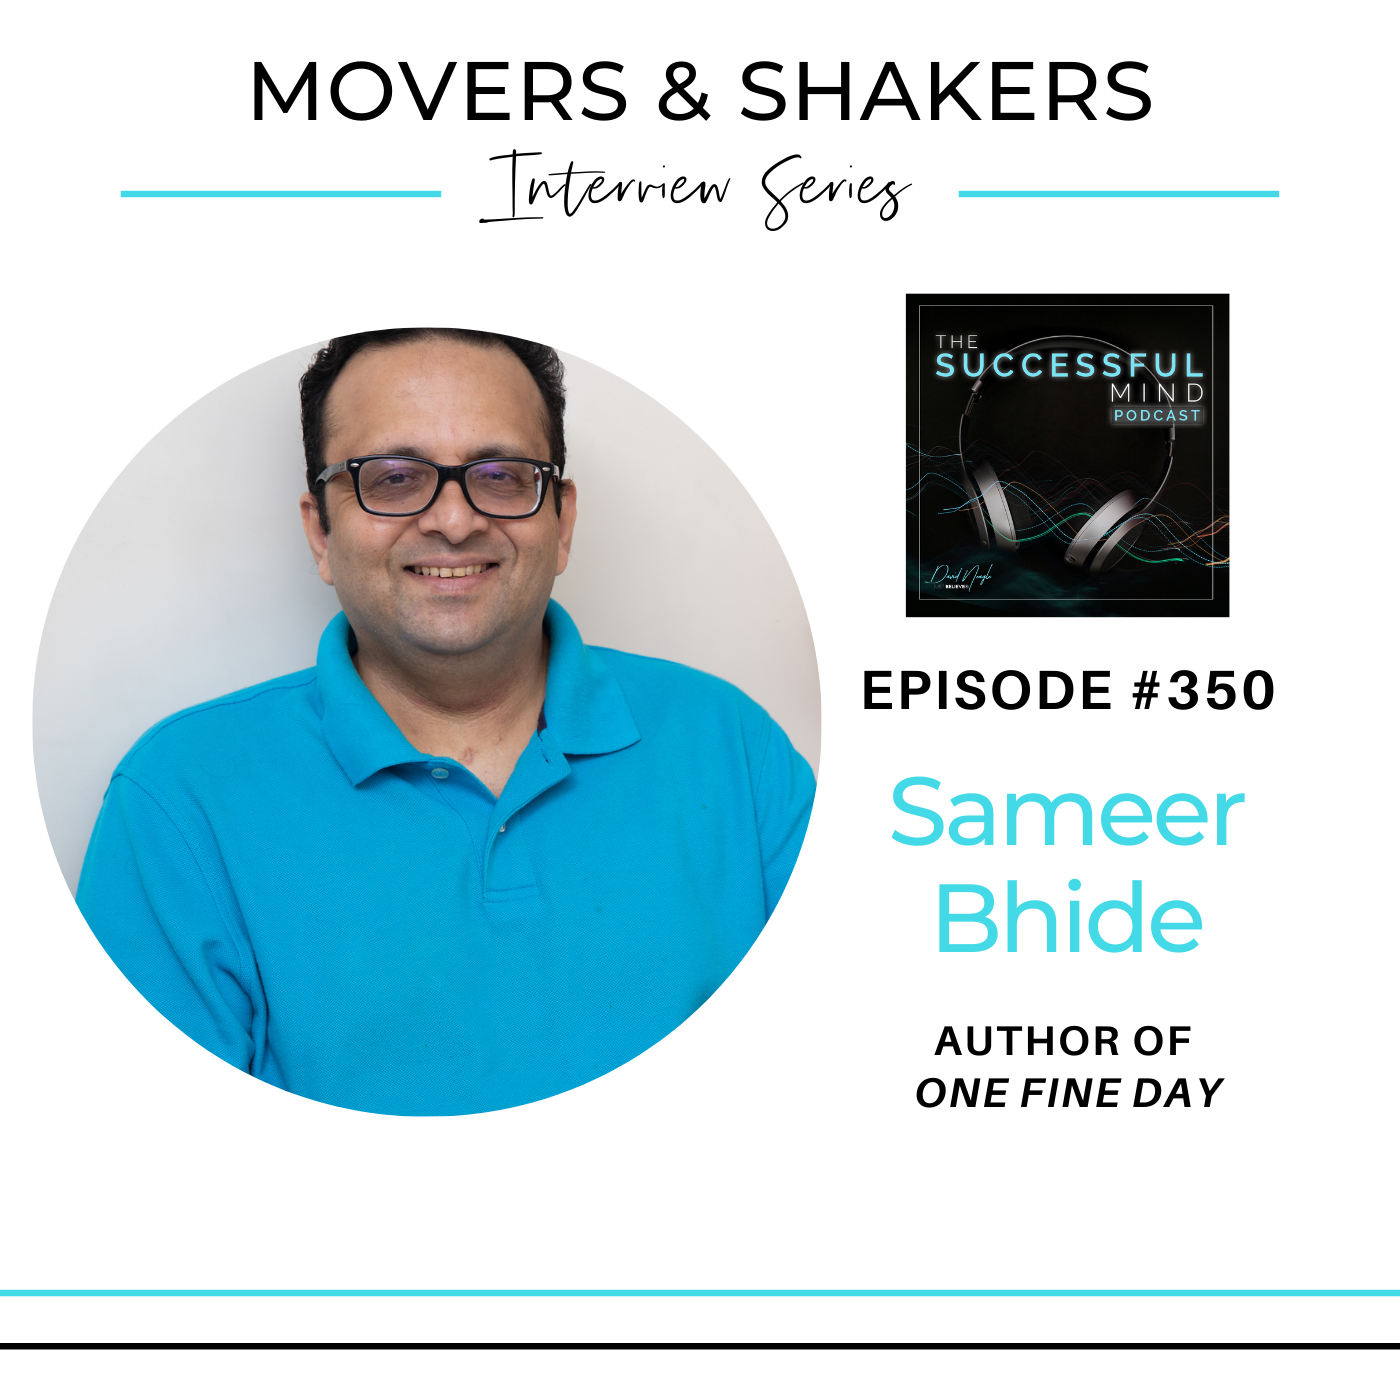 Movers & Shakers - Sameer Bhide - One Fine Day